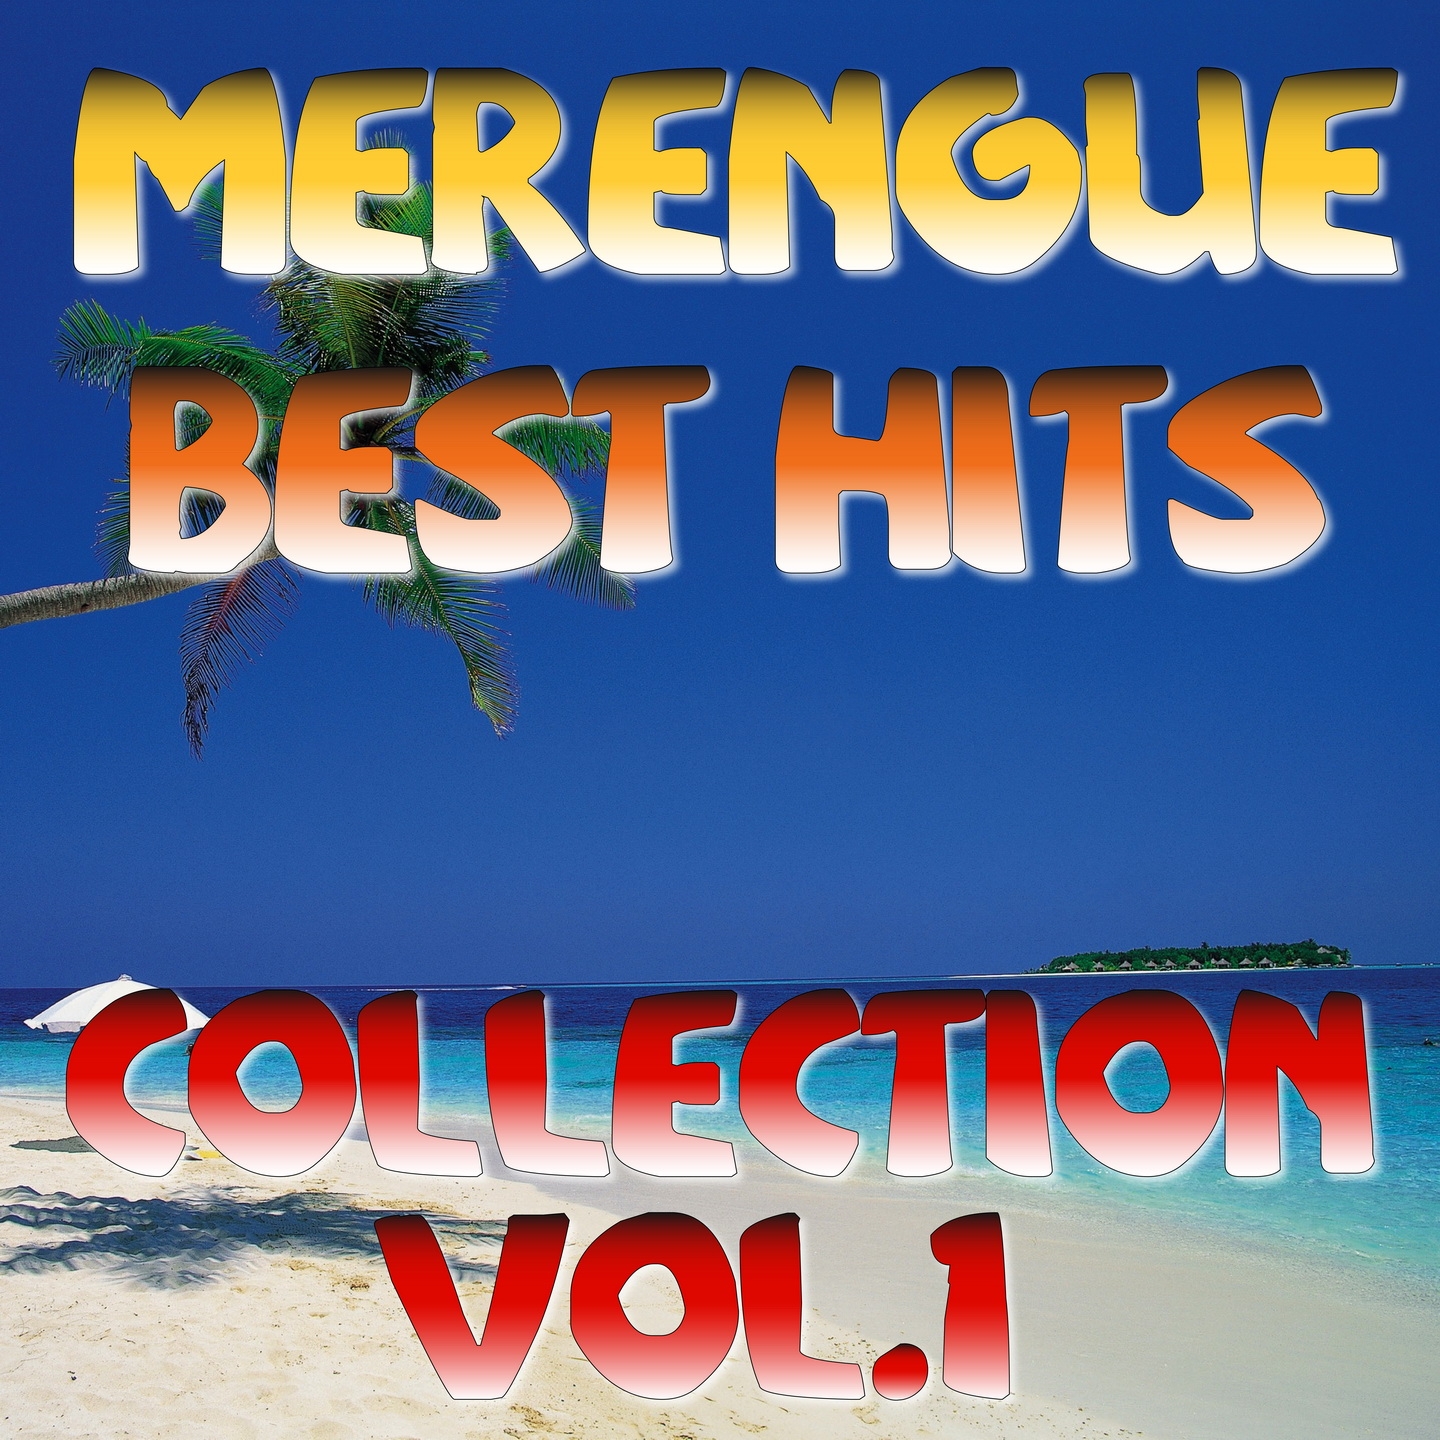 Merengue Best Hits Collection, Vol. 1